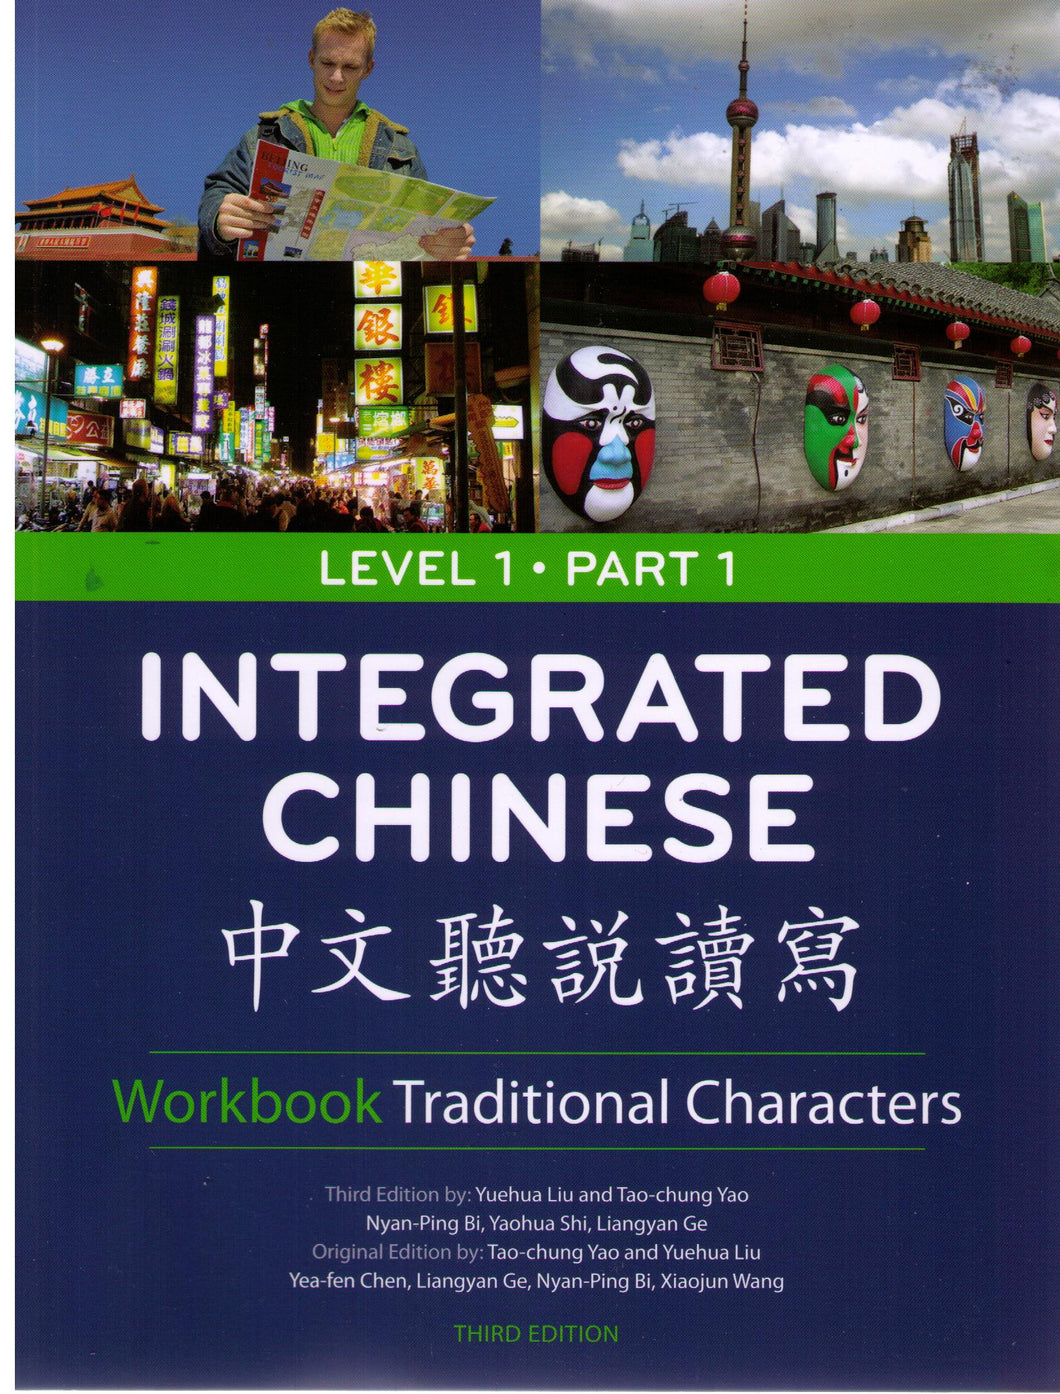 Integrated Chinese Level 1 Part 1-3rd Ed. Workbook-Traditional